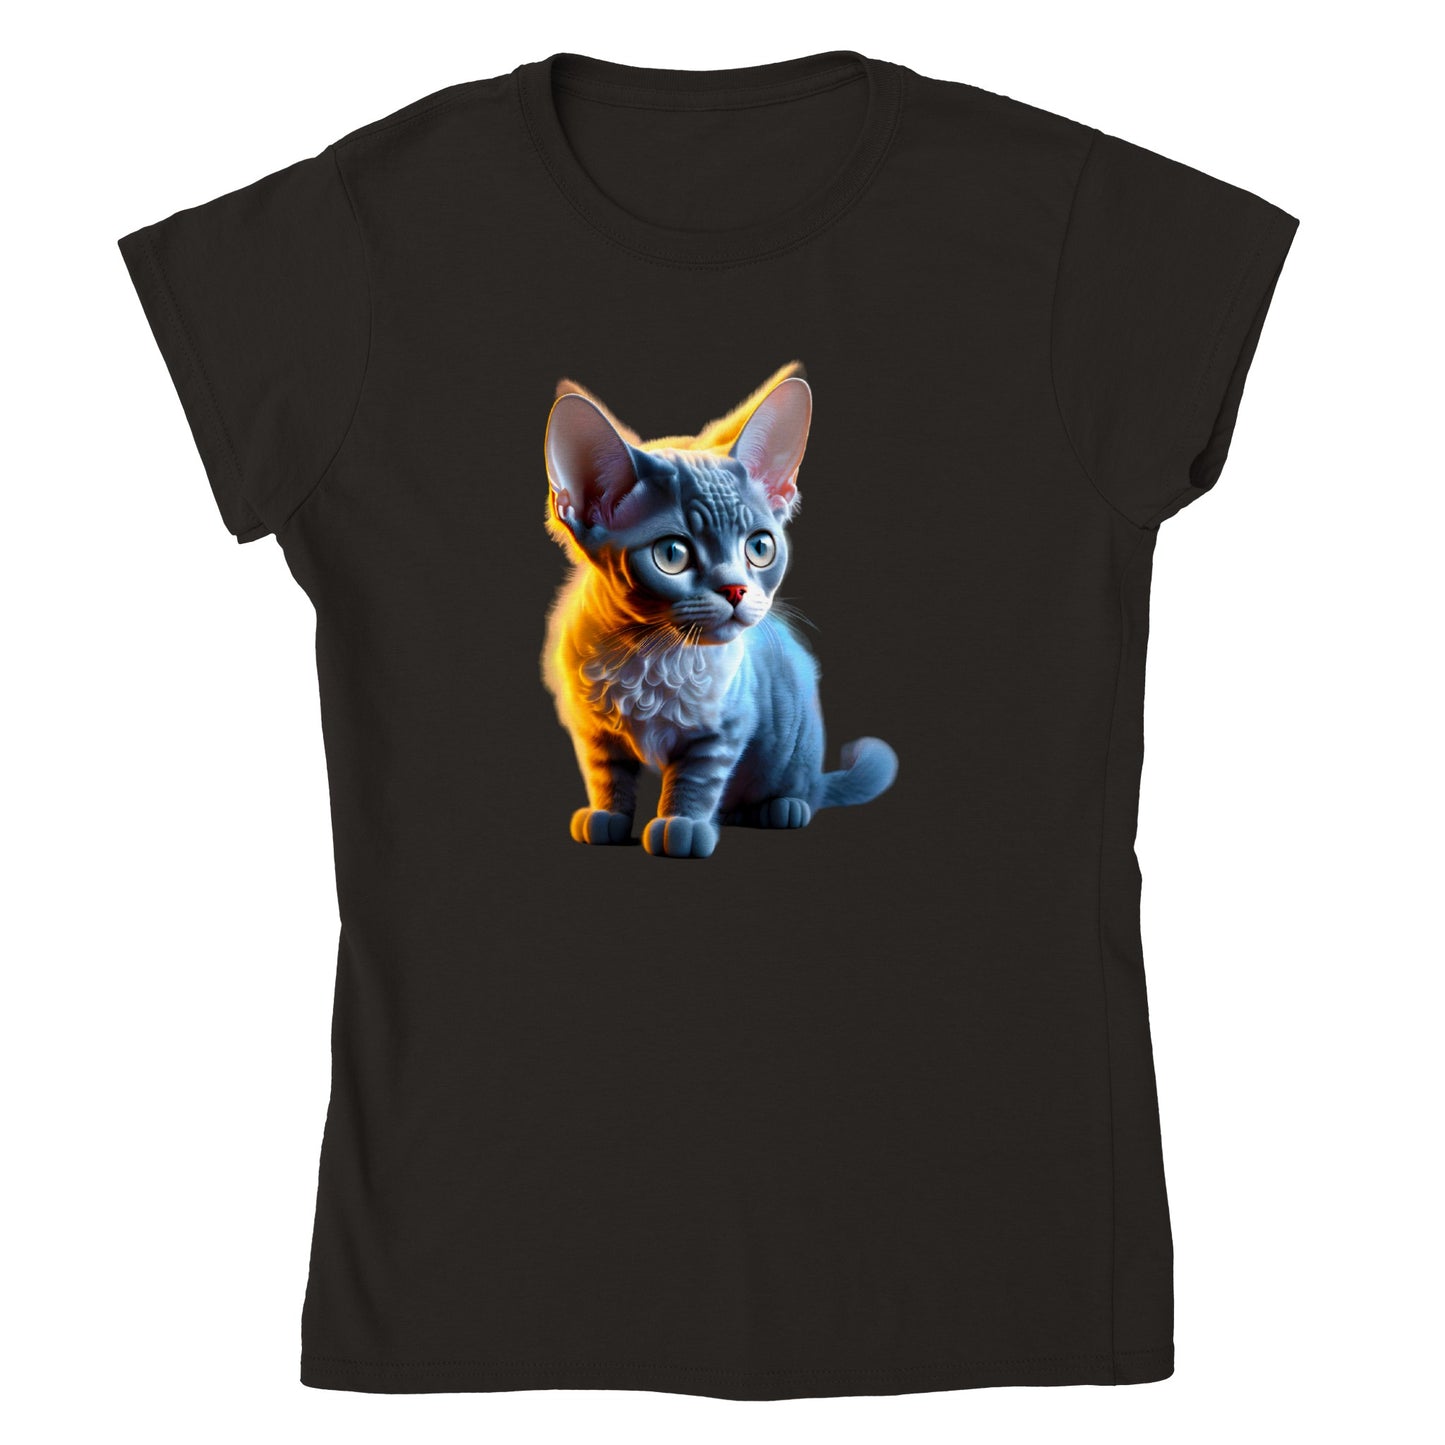 Adorable, Cool, Cute Cats and Kittens Toy - Classic Women’s Crewneck T-Shirt 17